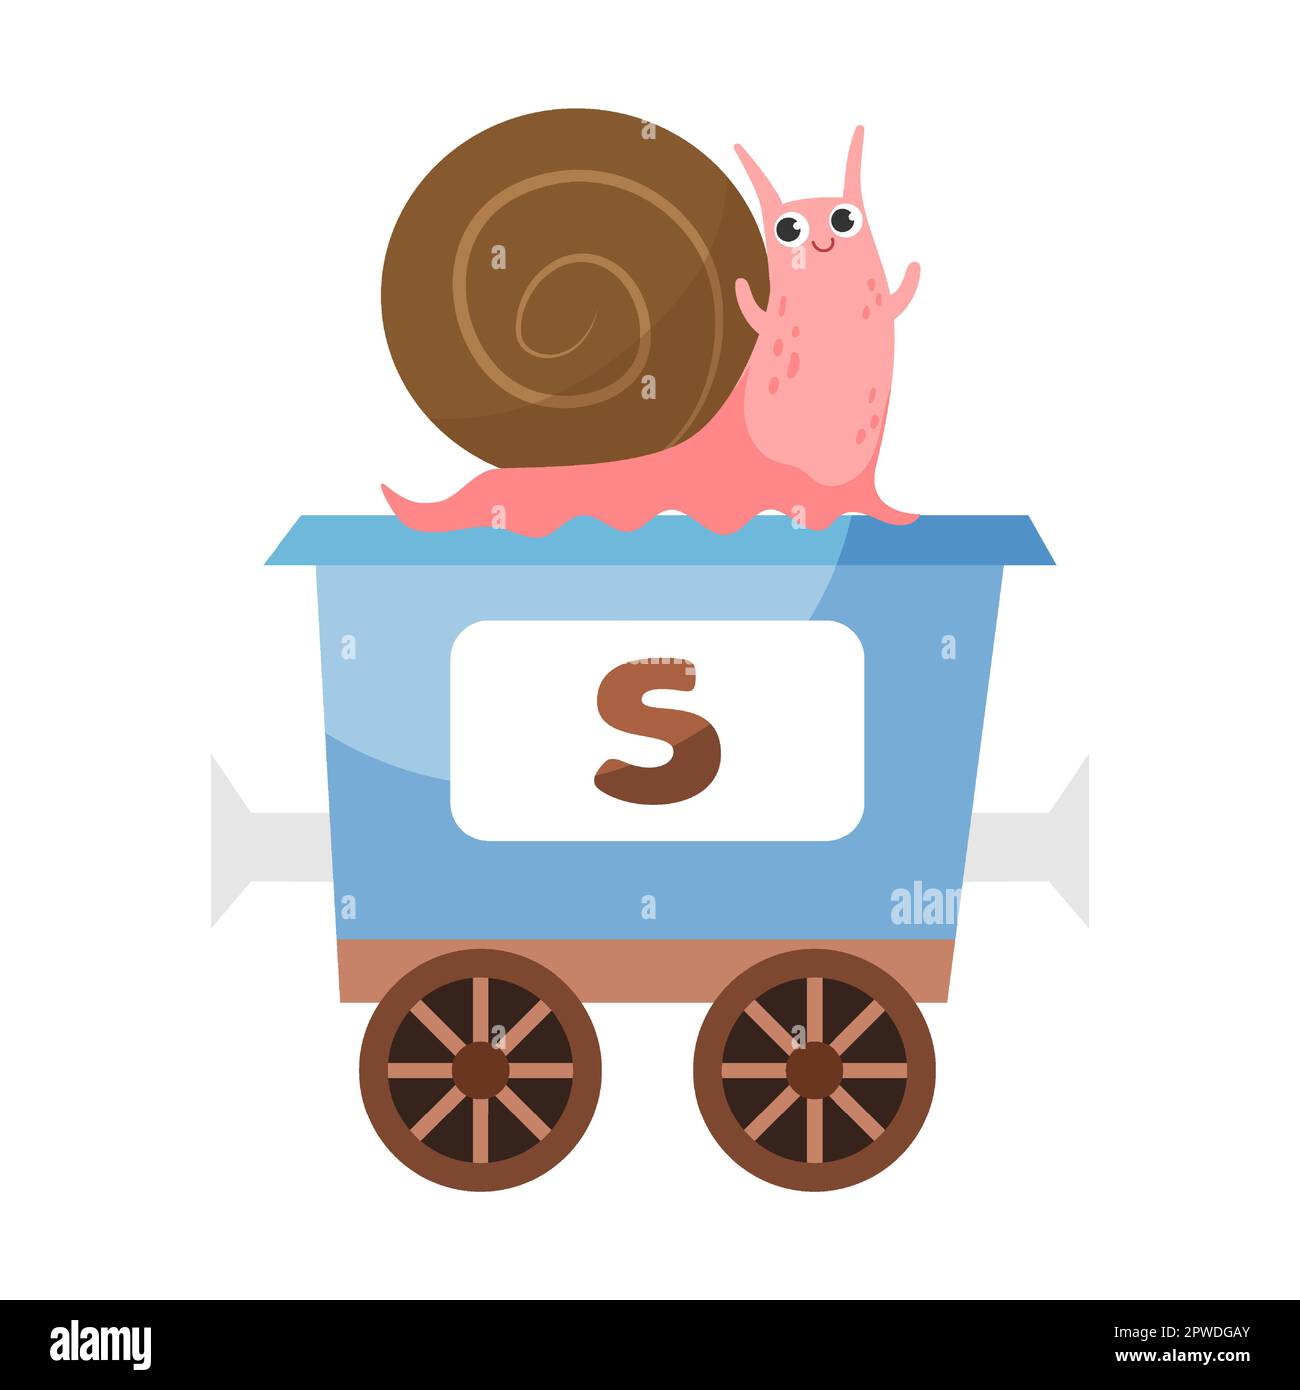 letter S, snail. Cute animal in colorful alphabet train. Vector illustration of learning toy for preschool children. Cartoon animals sitting in Stock Vector